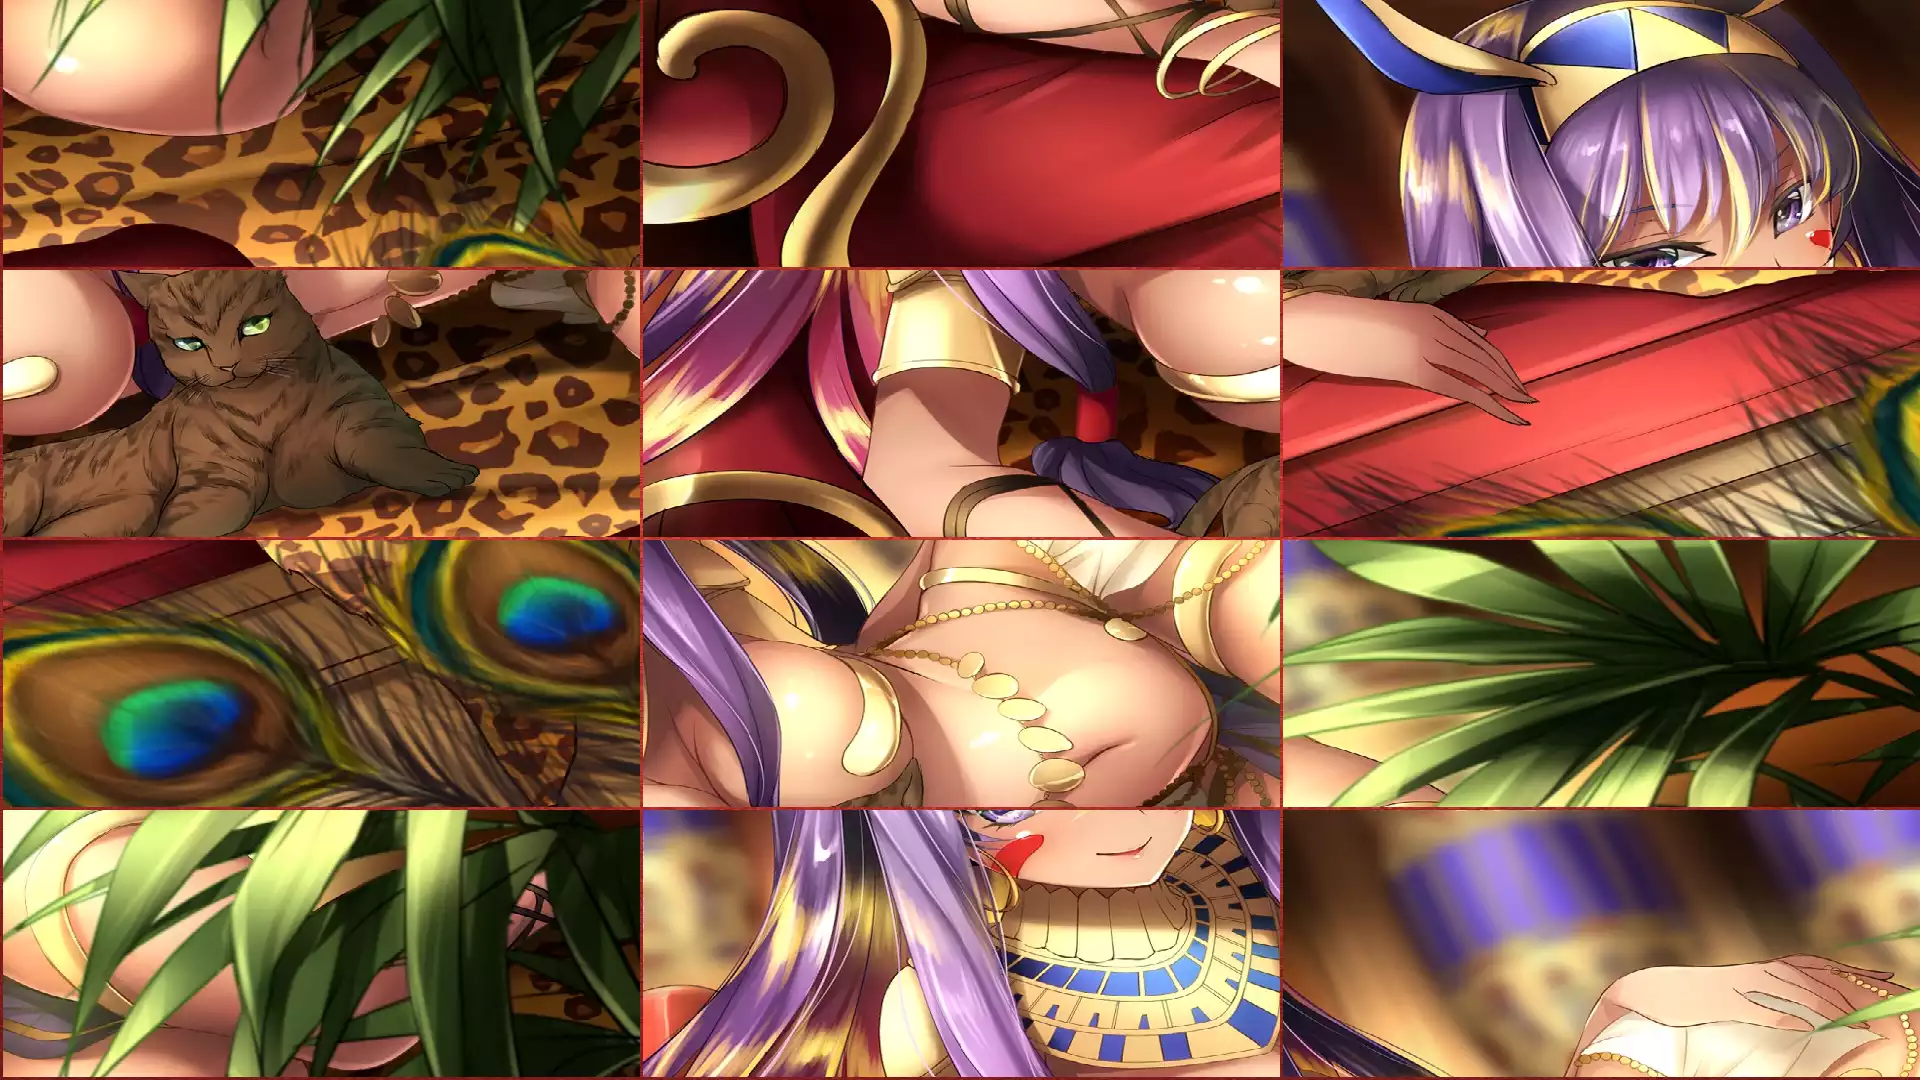 Hot Cats Puzzle collection,android,hentia,puzzles,anime,porn,sexgalleries,picture,panties,pegging,download,hentai,games,galleries,wallpaper,puzzle,pics,apps,pictures,image,sexy